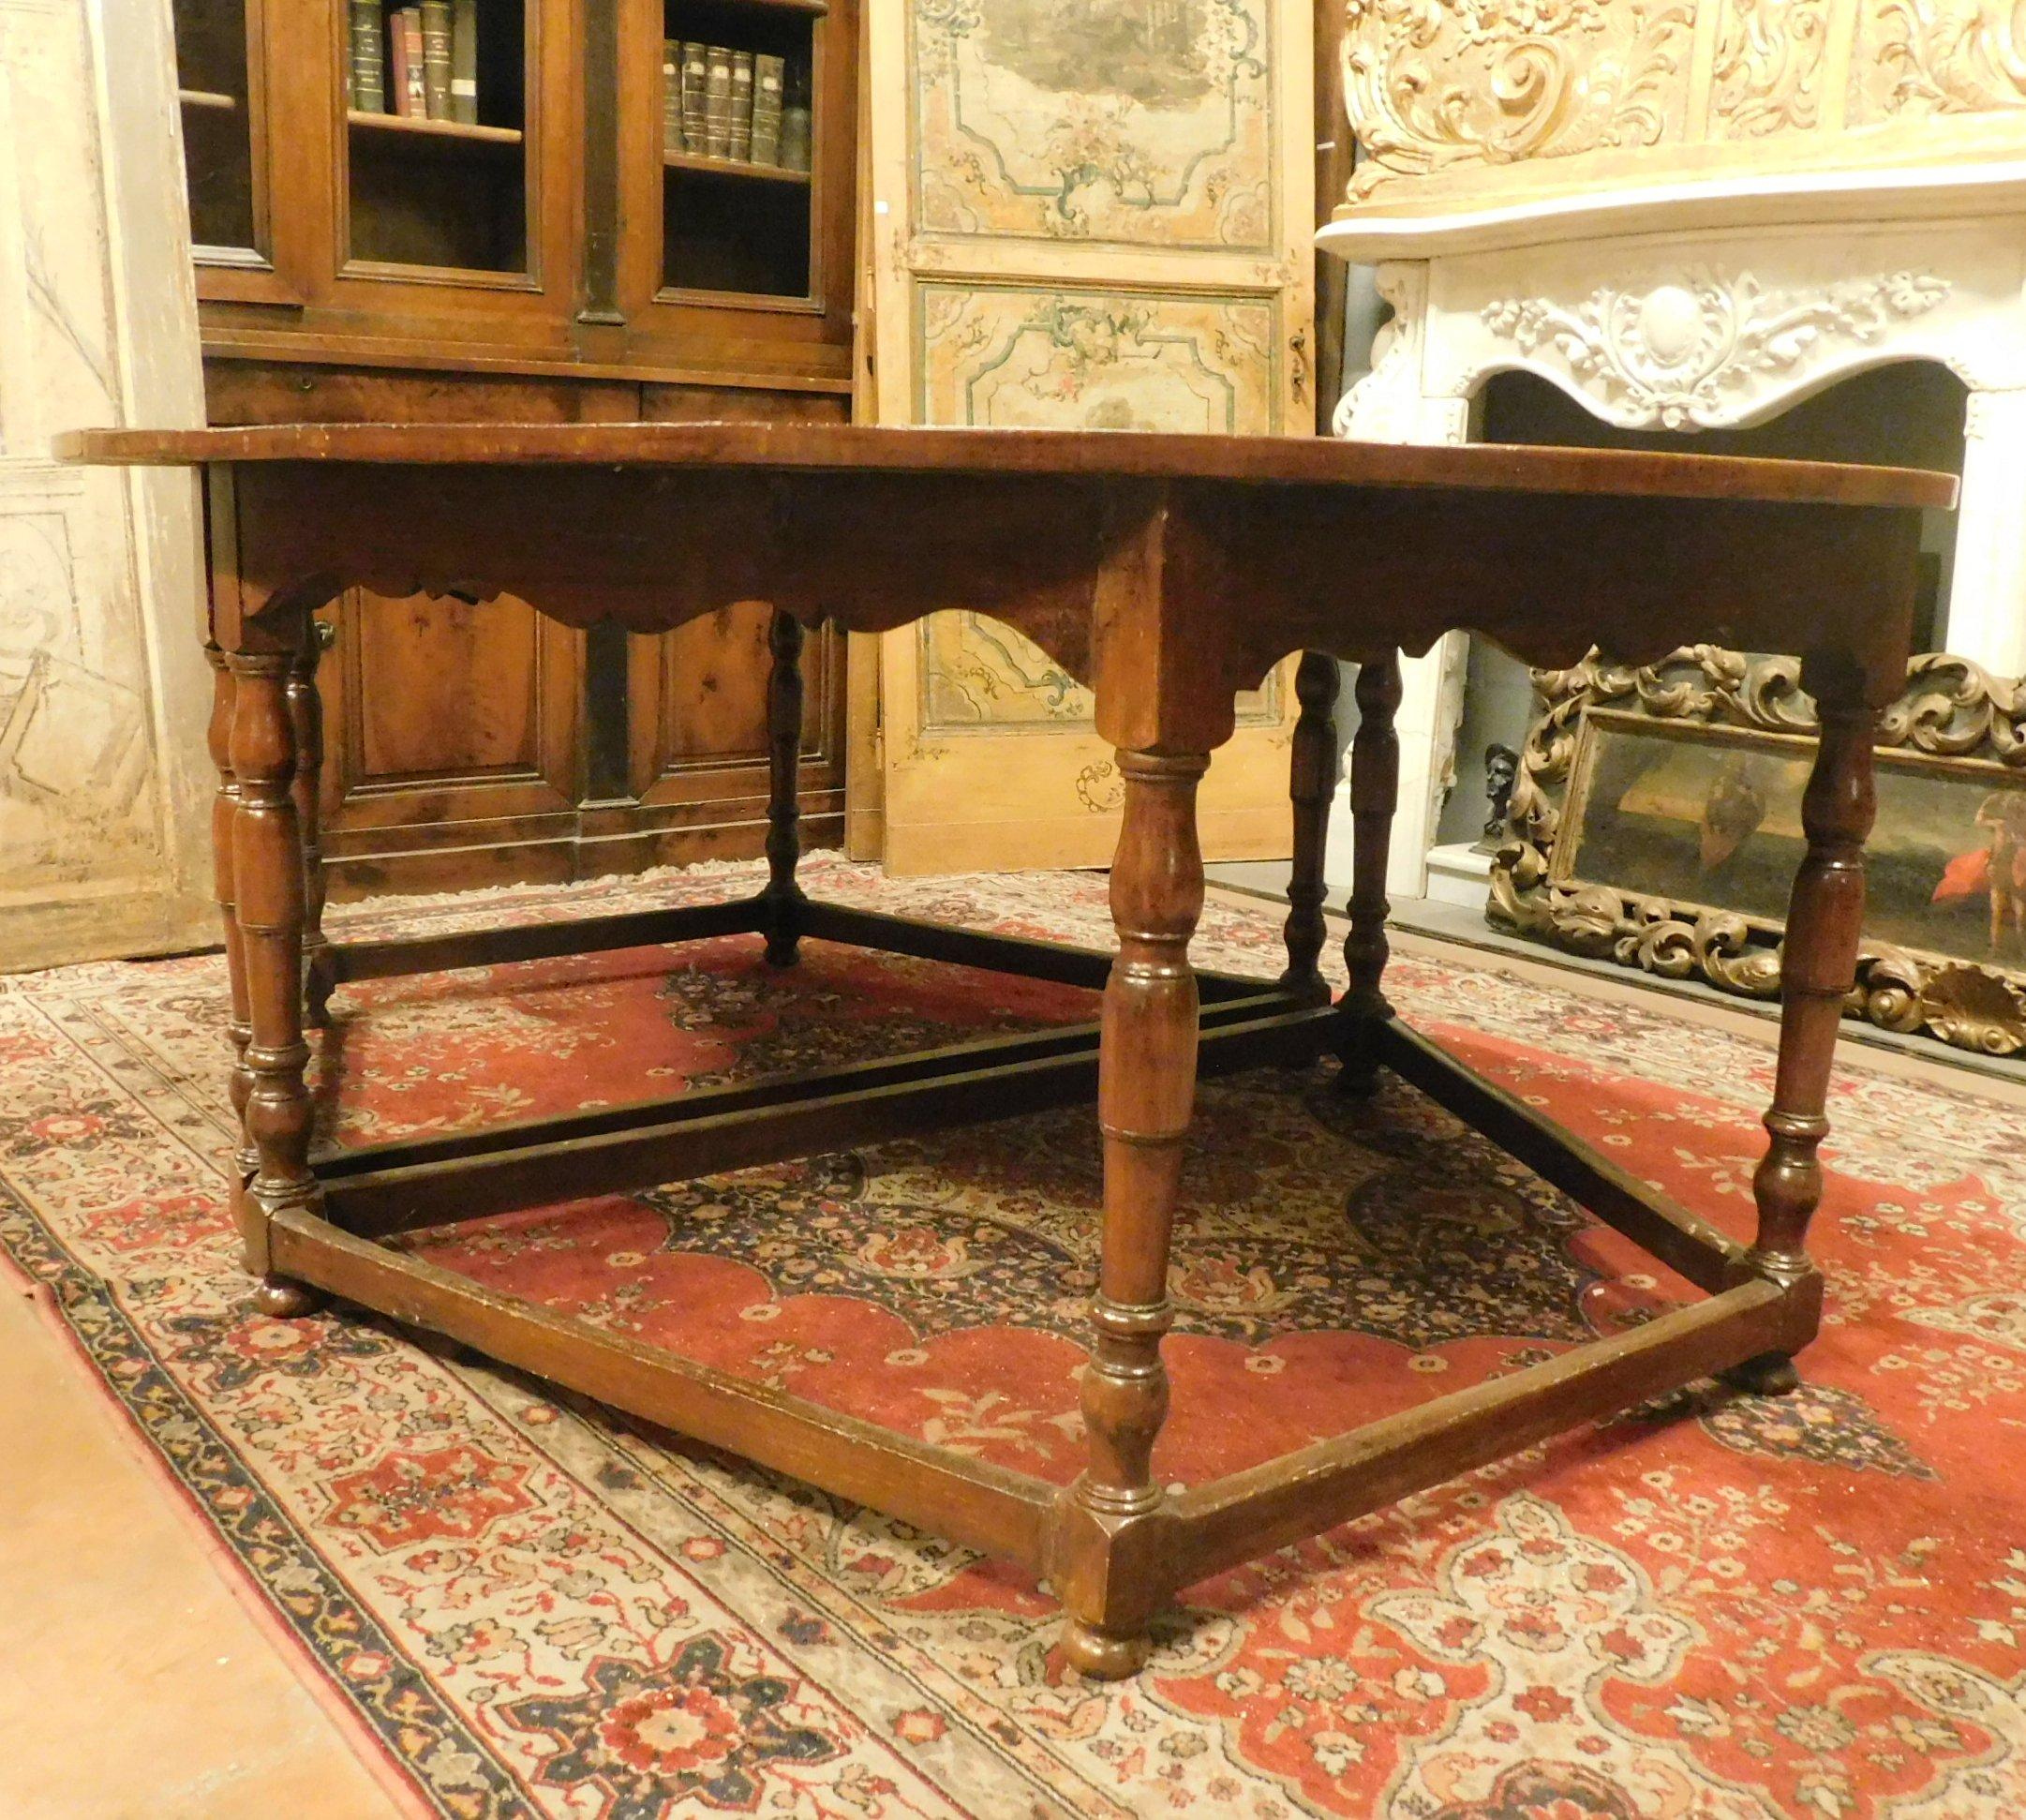 Hand-Carved Antique Oval Table in Beechwood, Divisible 2 Half-Moons with 8 Legs, 1600, Italy For Sale